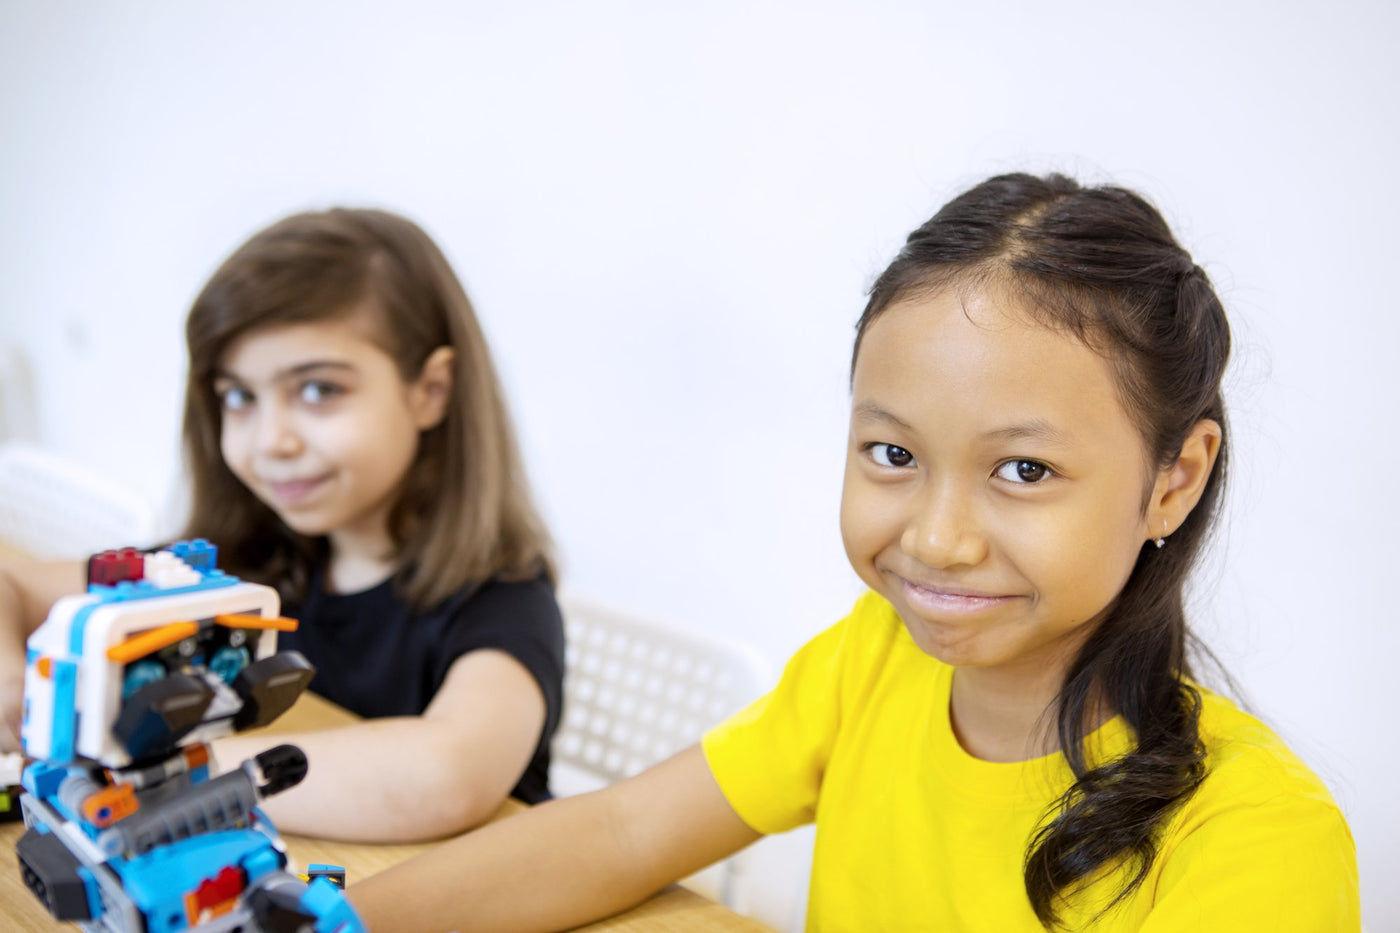 educational stem toys for 7 year olds